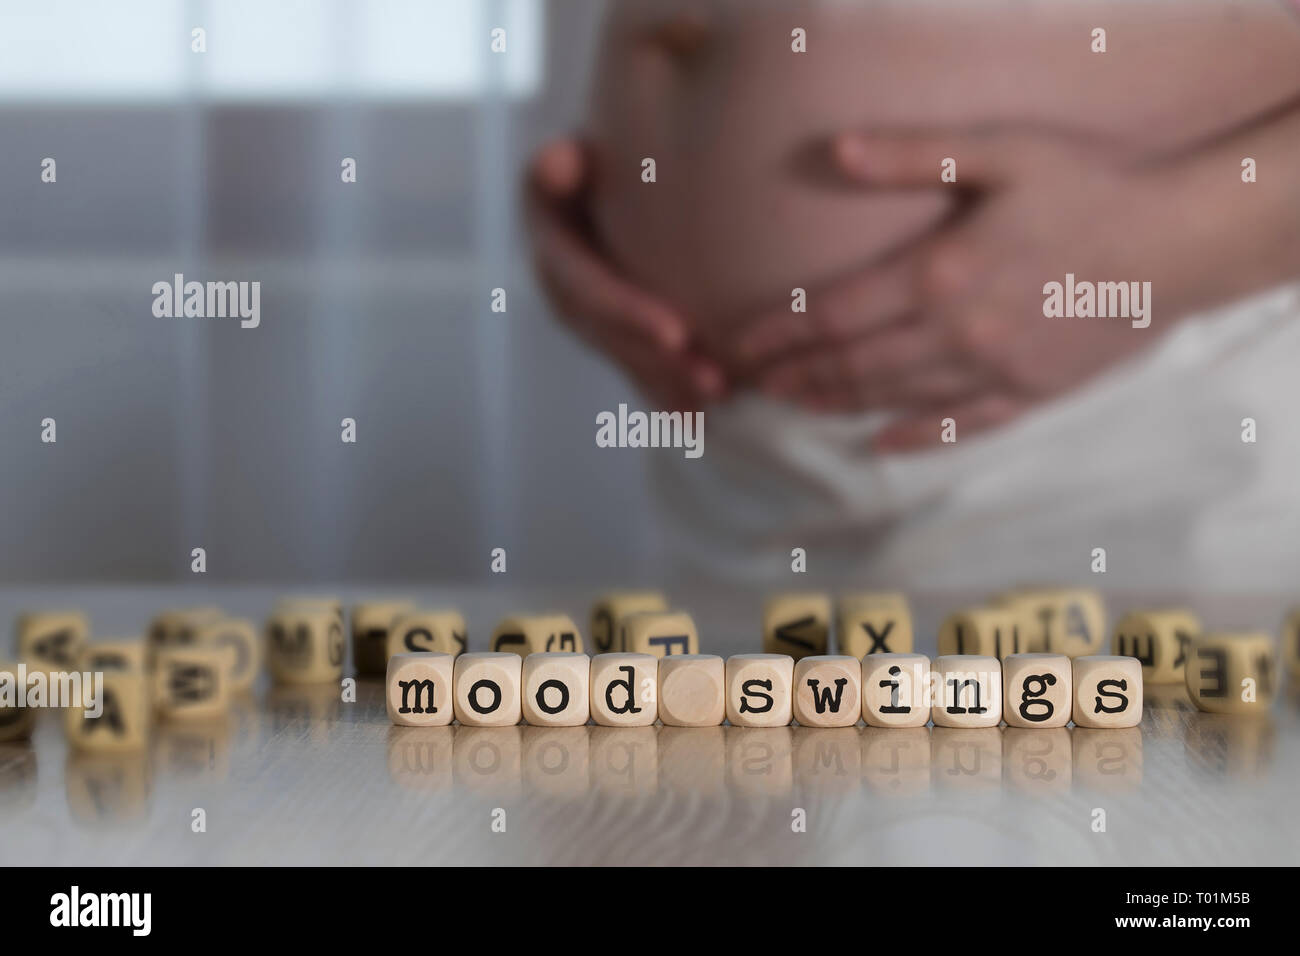 Words MOOD SWINGS  composed of wooden letters. Pregnant woman in the background Stock Photo